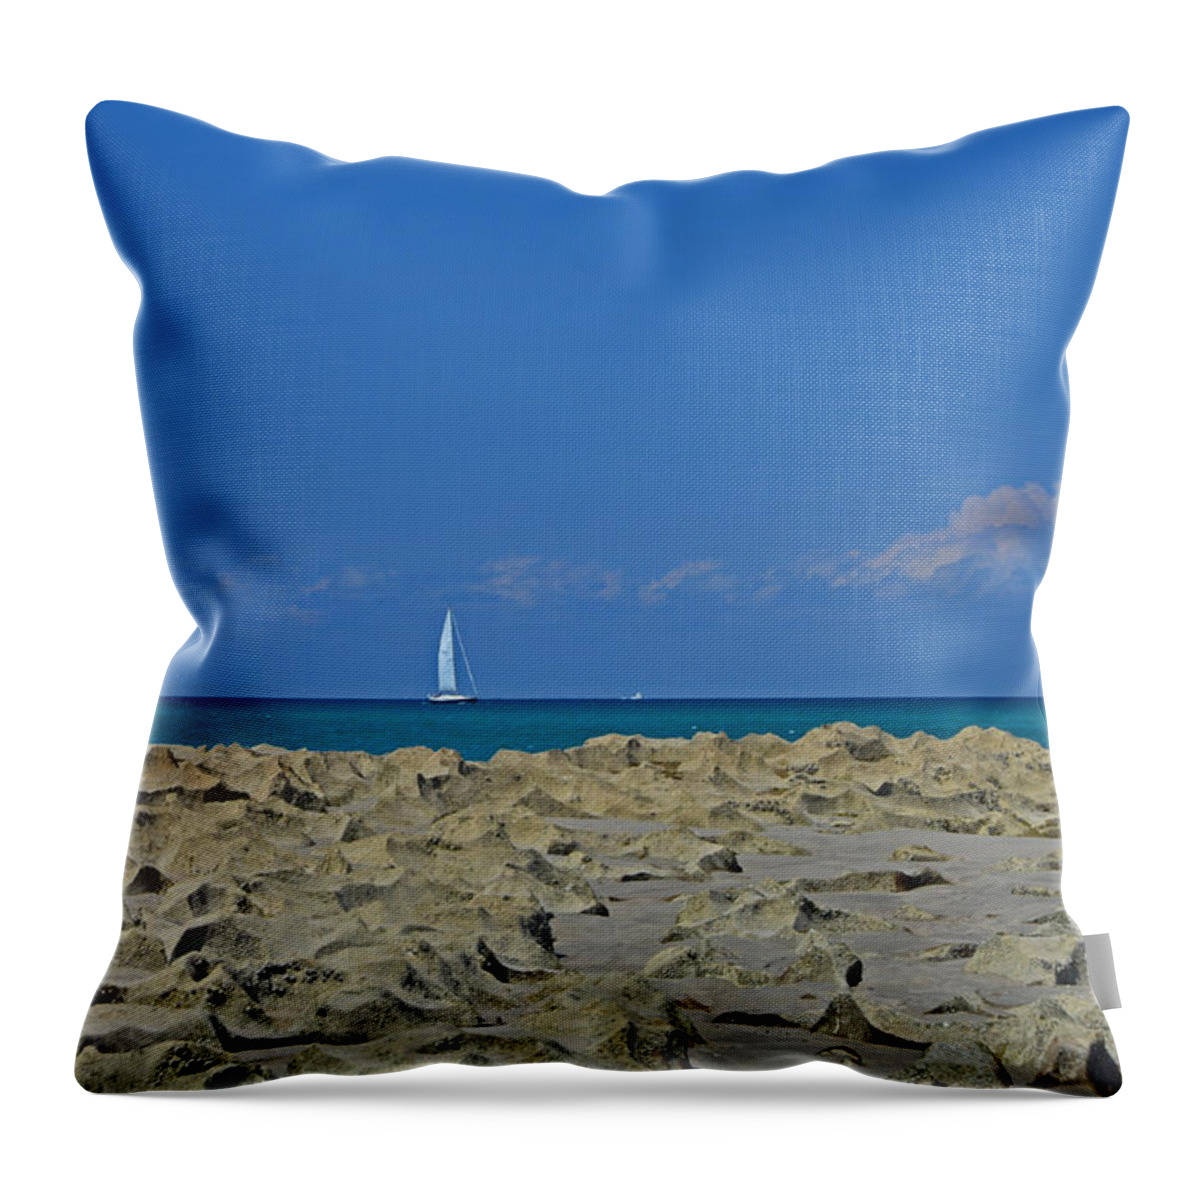  Throw Pillow featuring the photograph 44- Come Sail Away by Joseph Keane